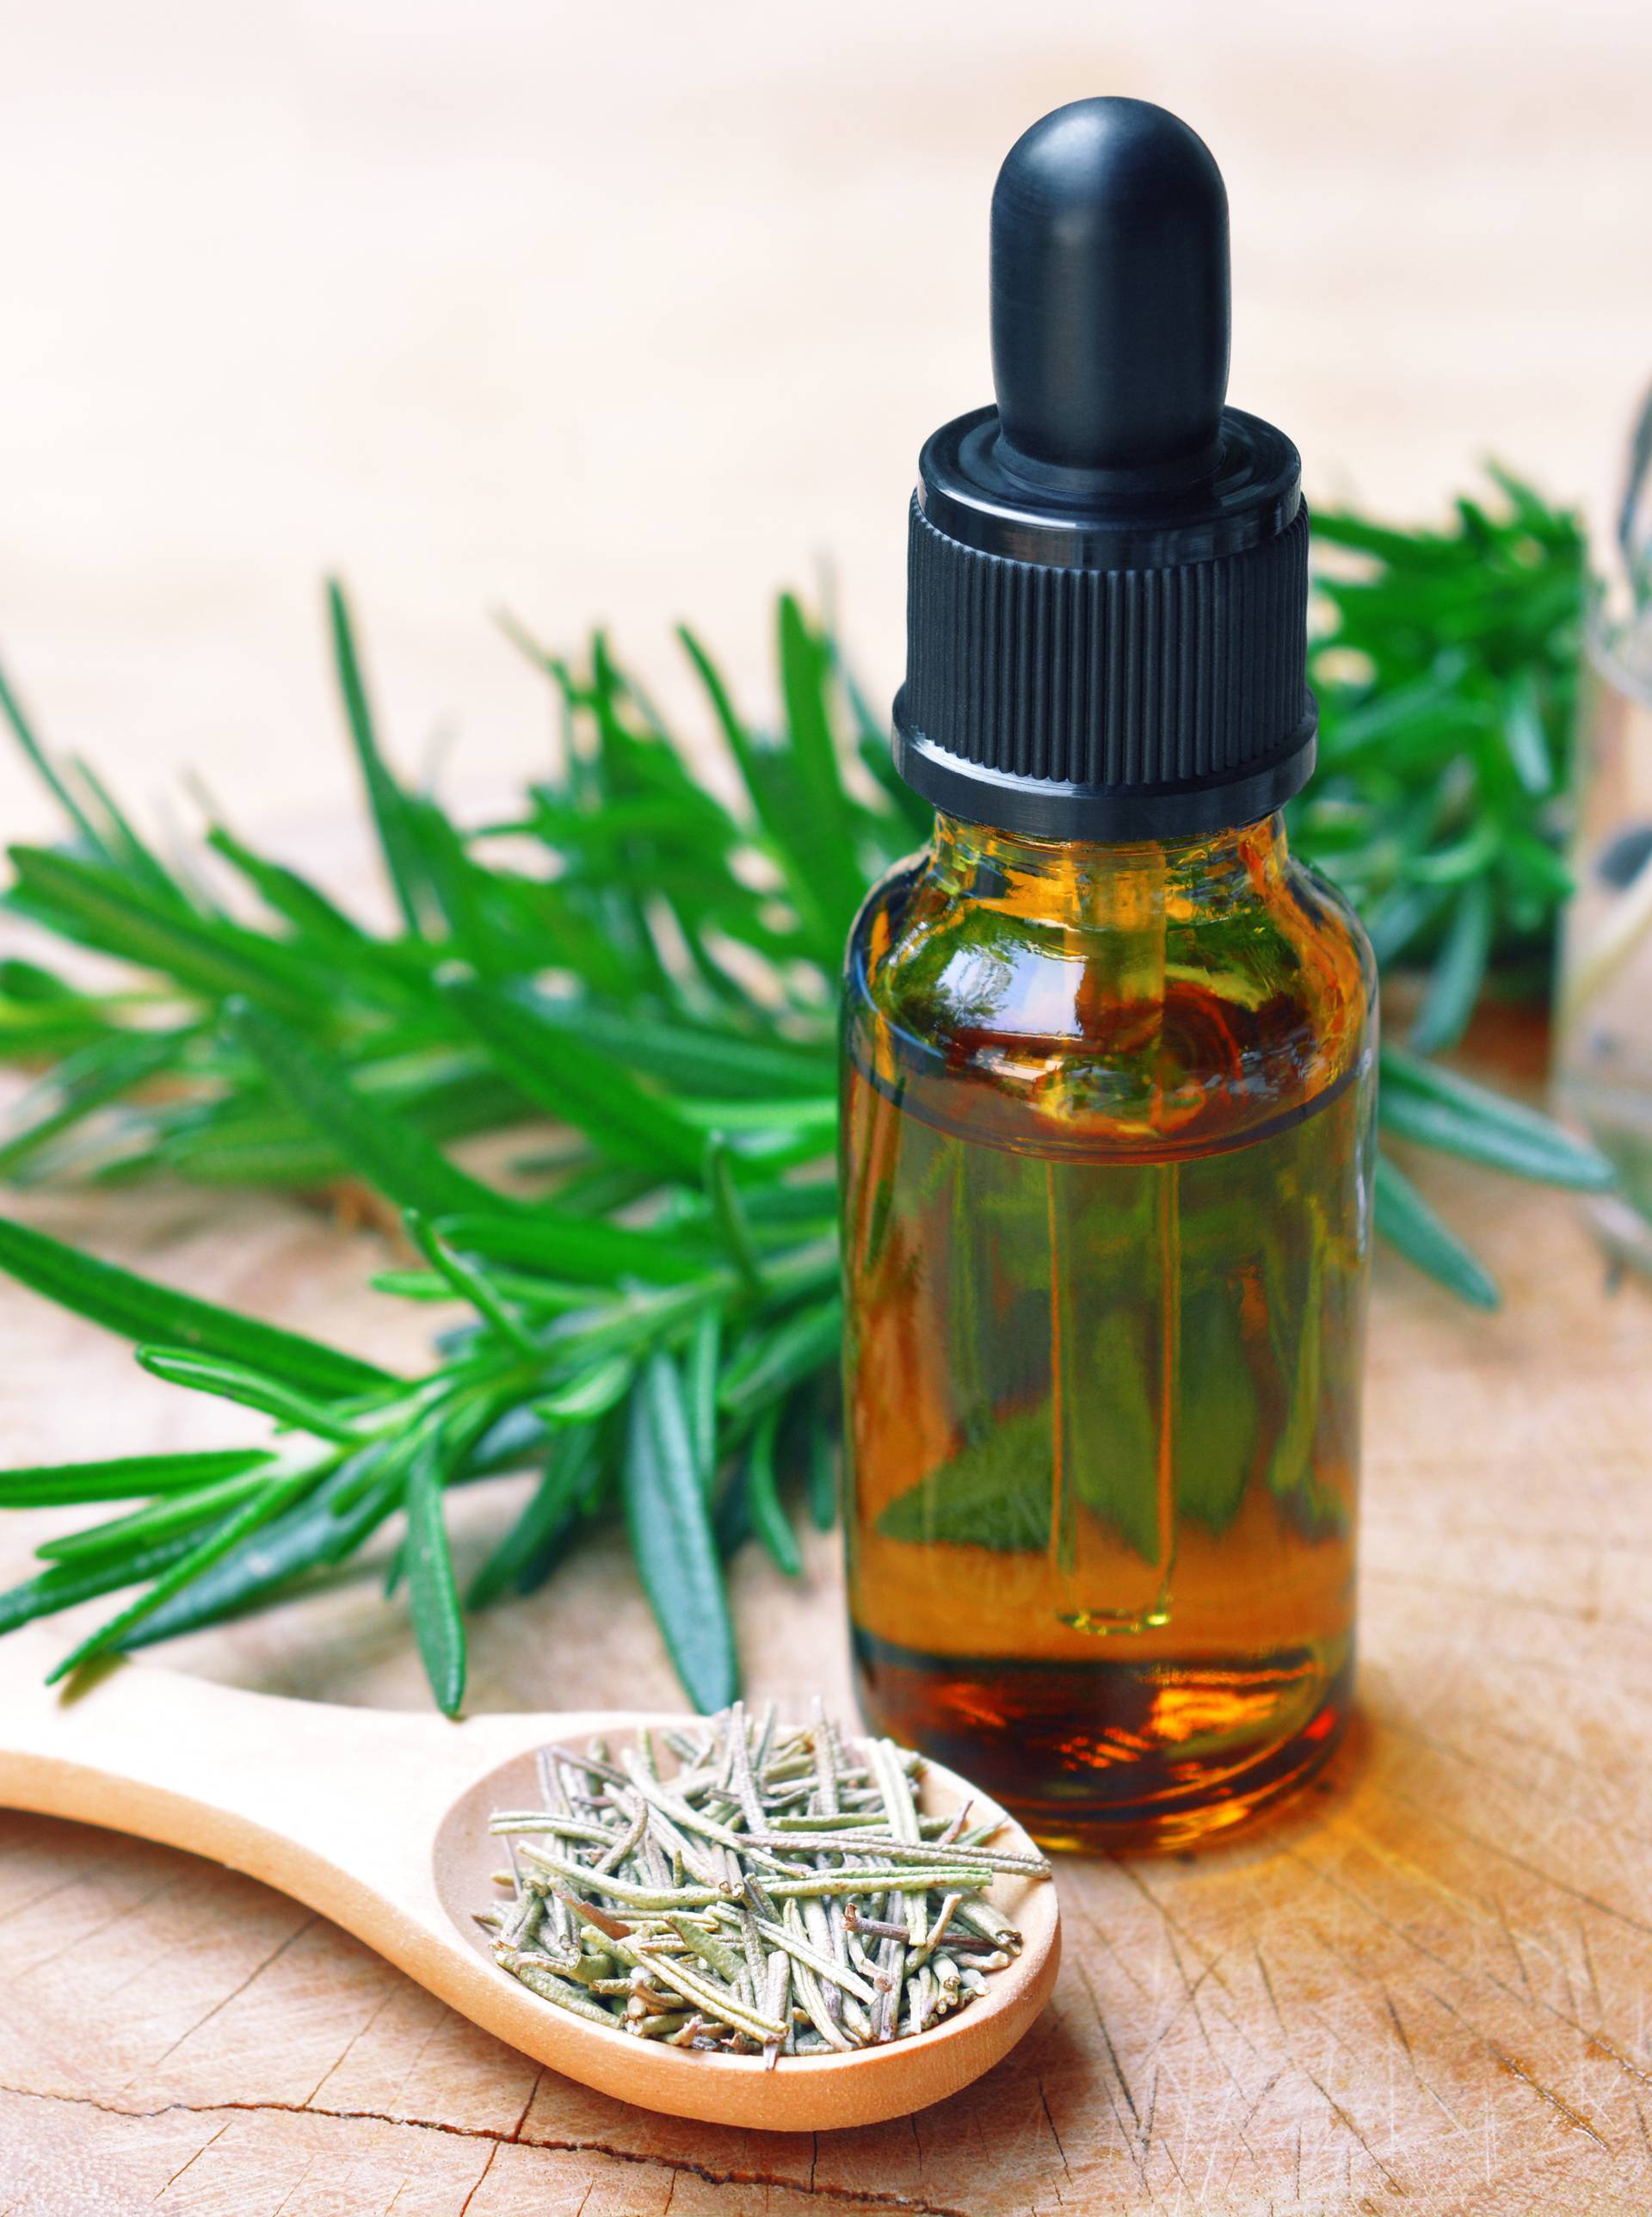 rosemary aromatherapy oil extract